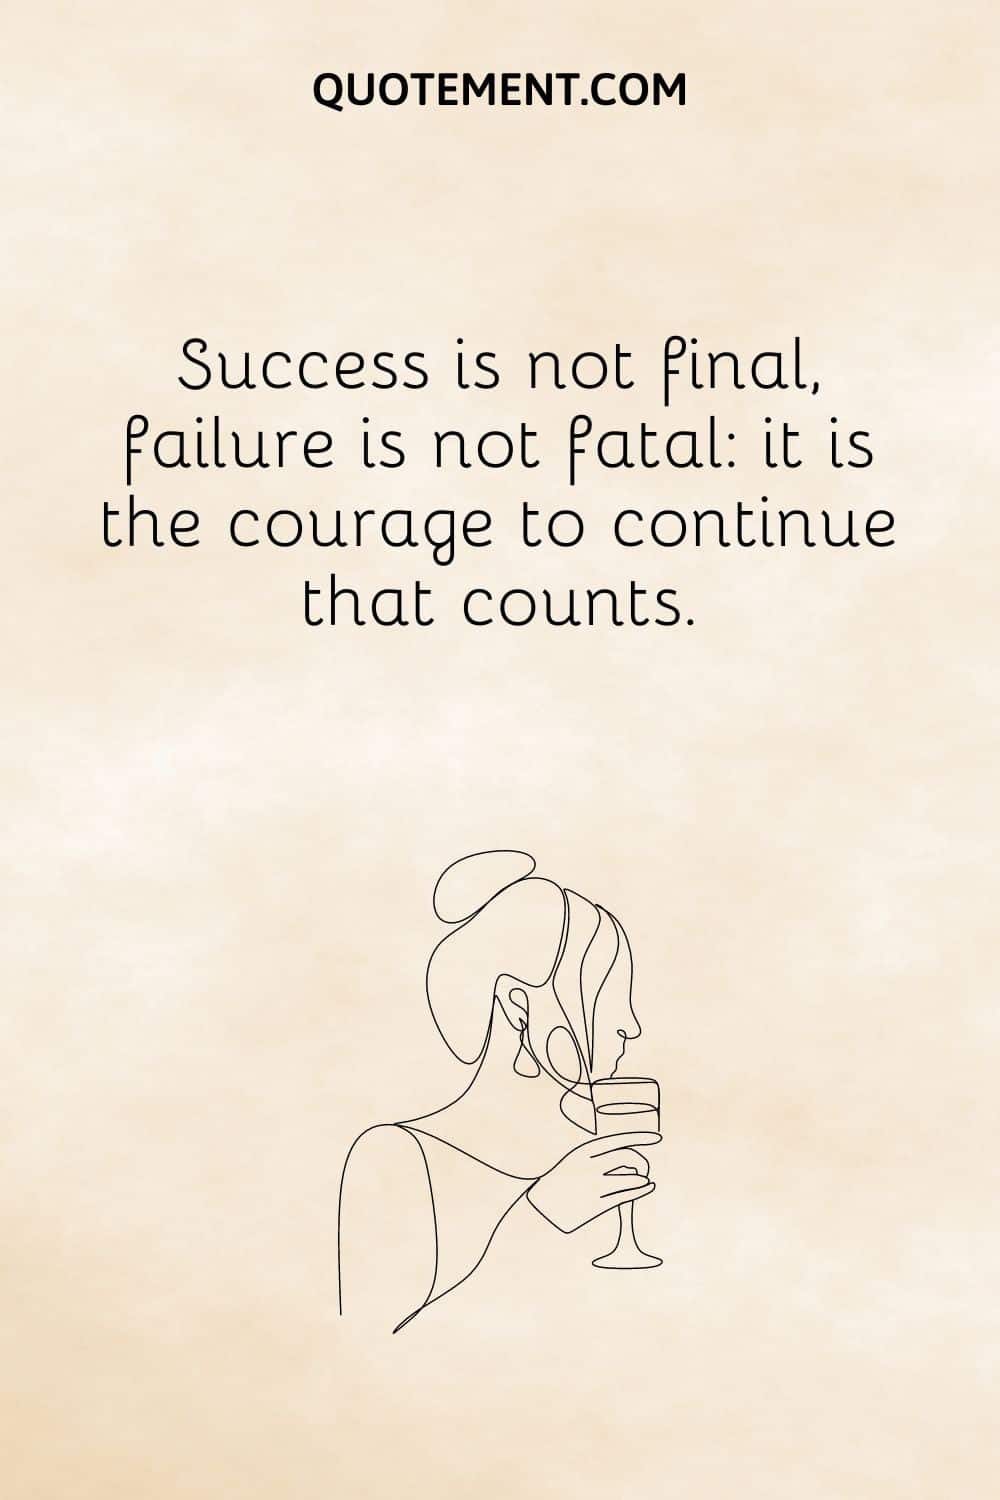 Success is not final, failure is not fatal it is the courage to continue that counts.